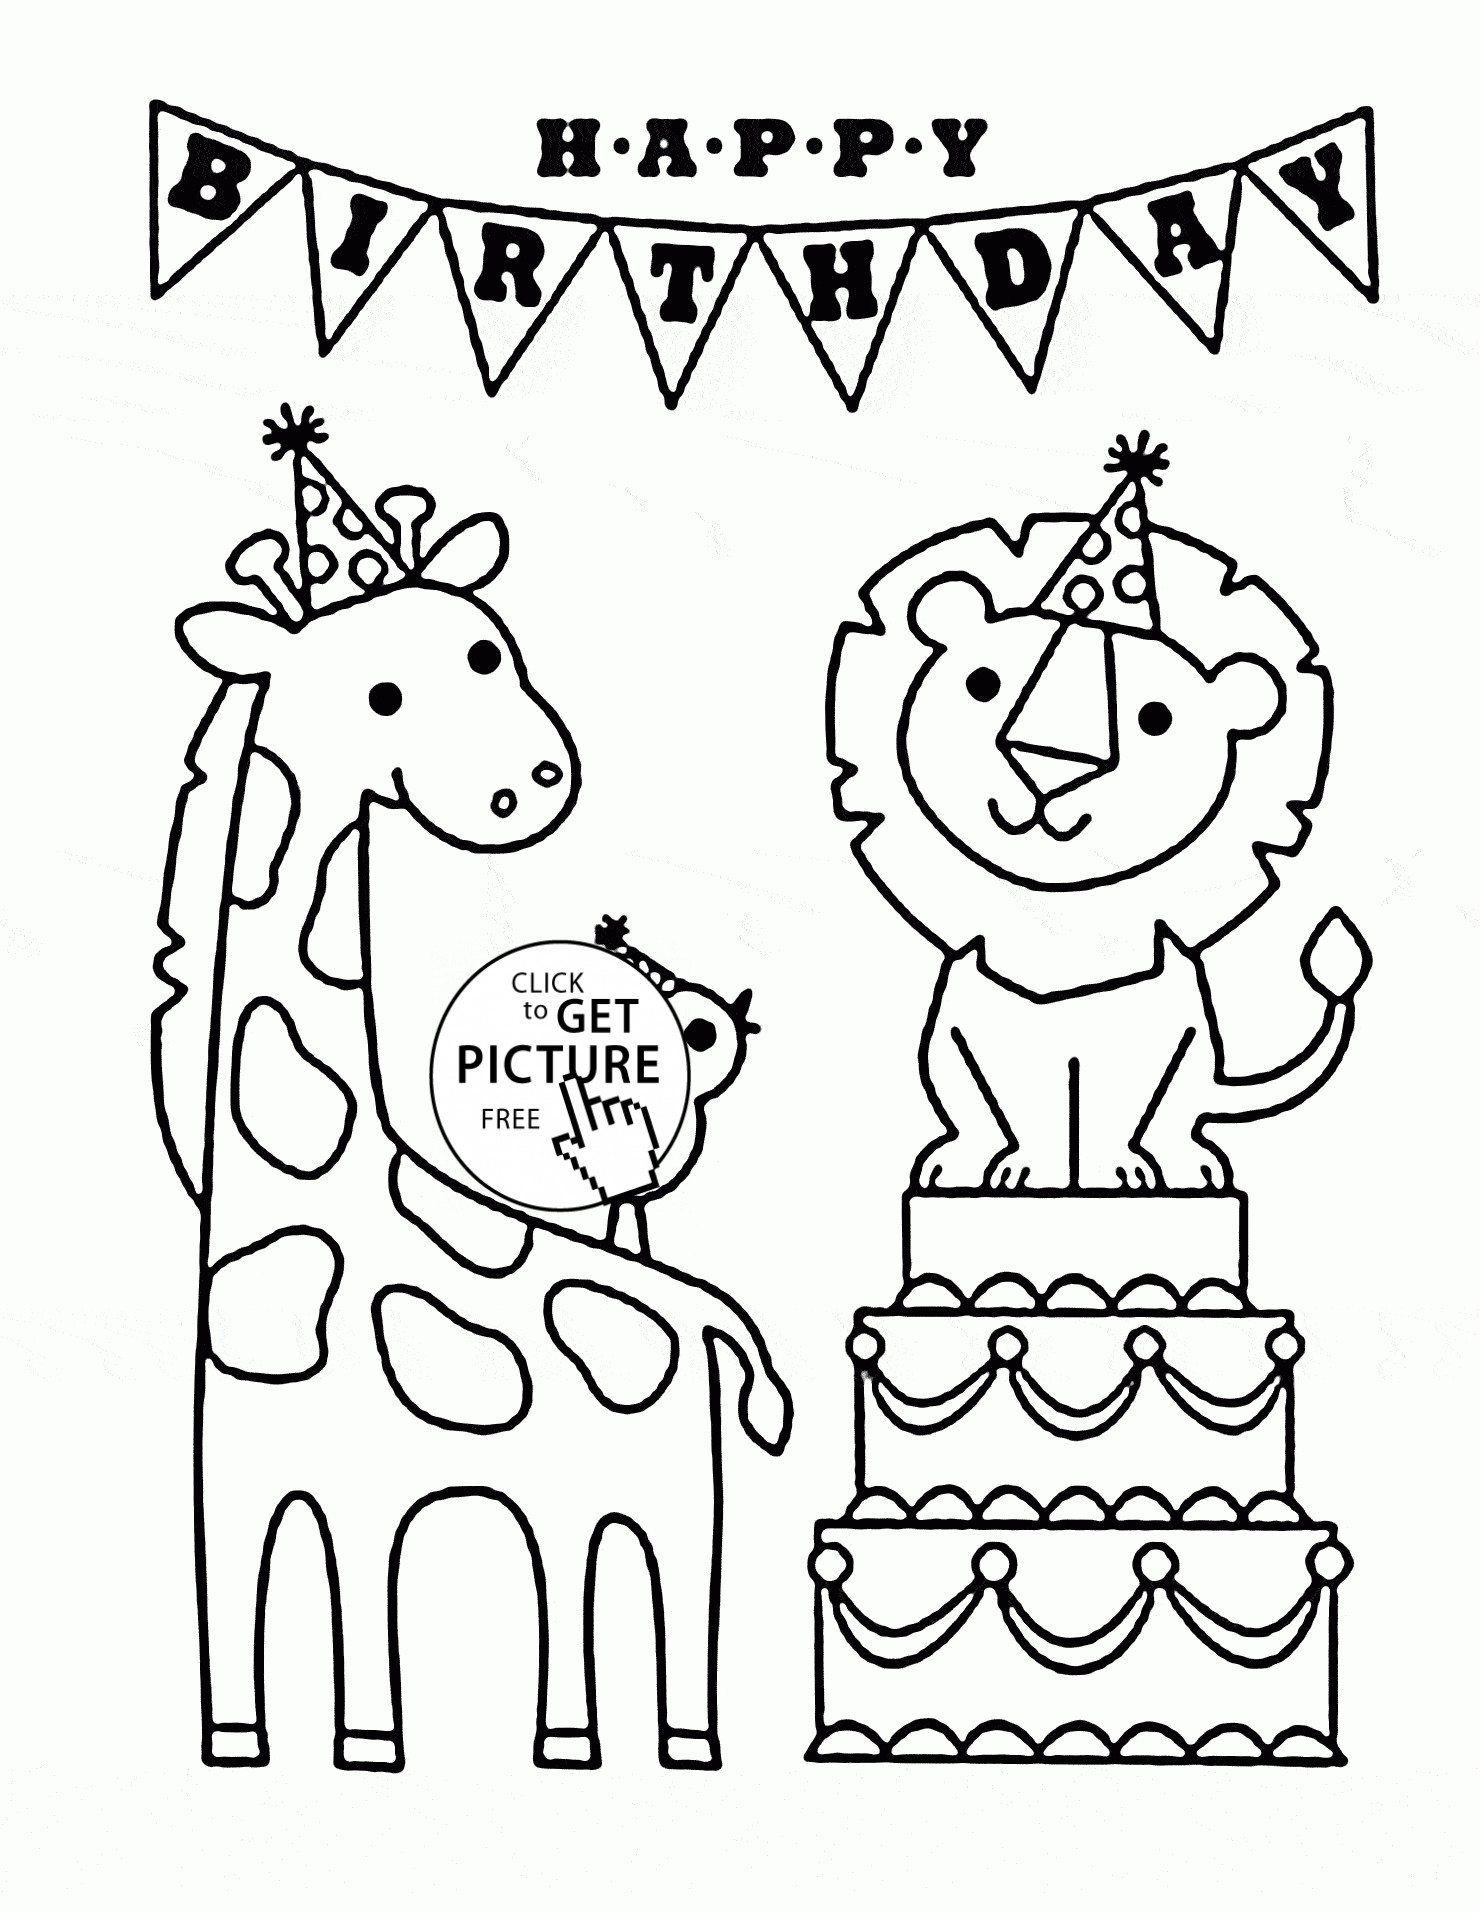 Fun Animal Coloring Pages For Boys
 Happy Birthday and Funny Animals coloring page for kids